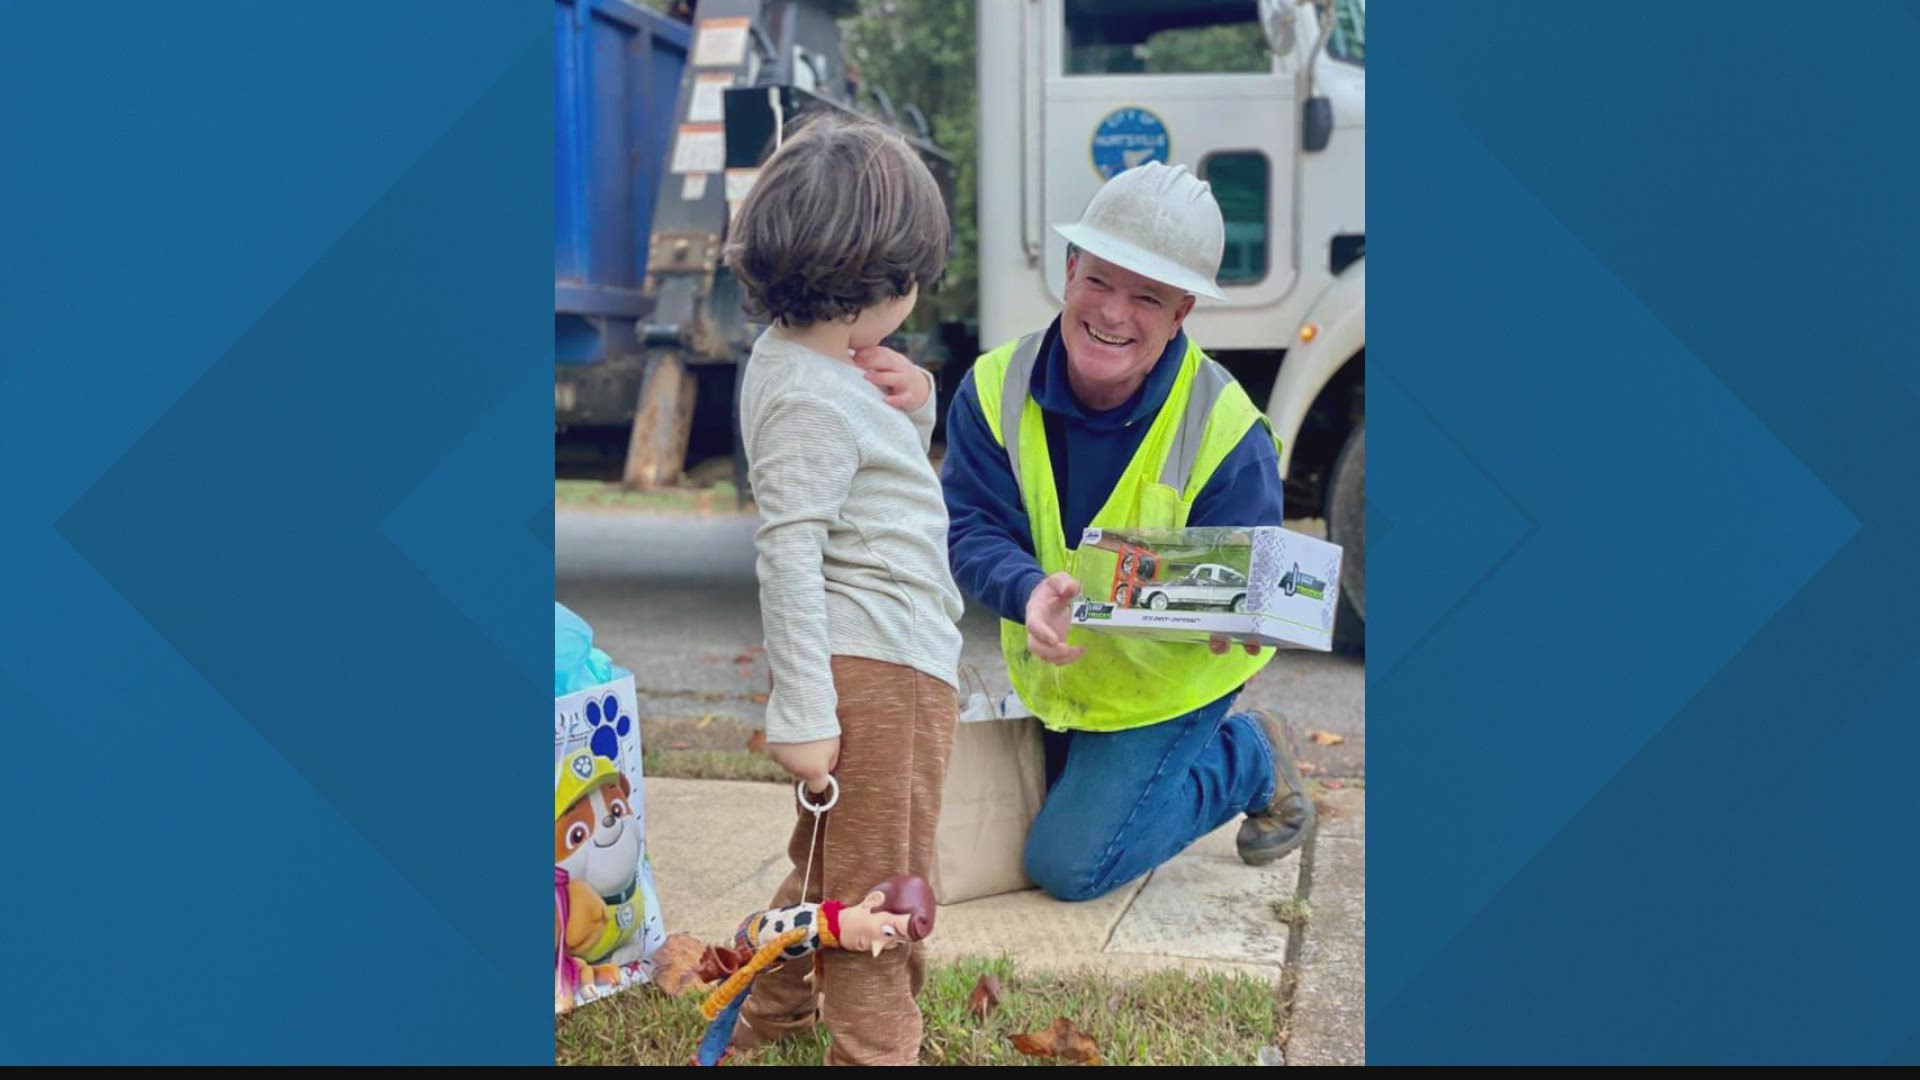 An unlikely friendship has formed between a 3-year-old boy and the Huntsville garbage truck driver that drives by his house every Tuesday.